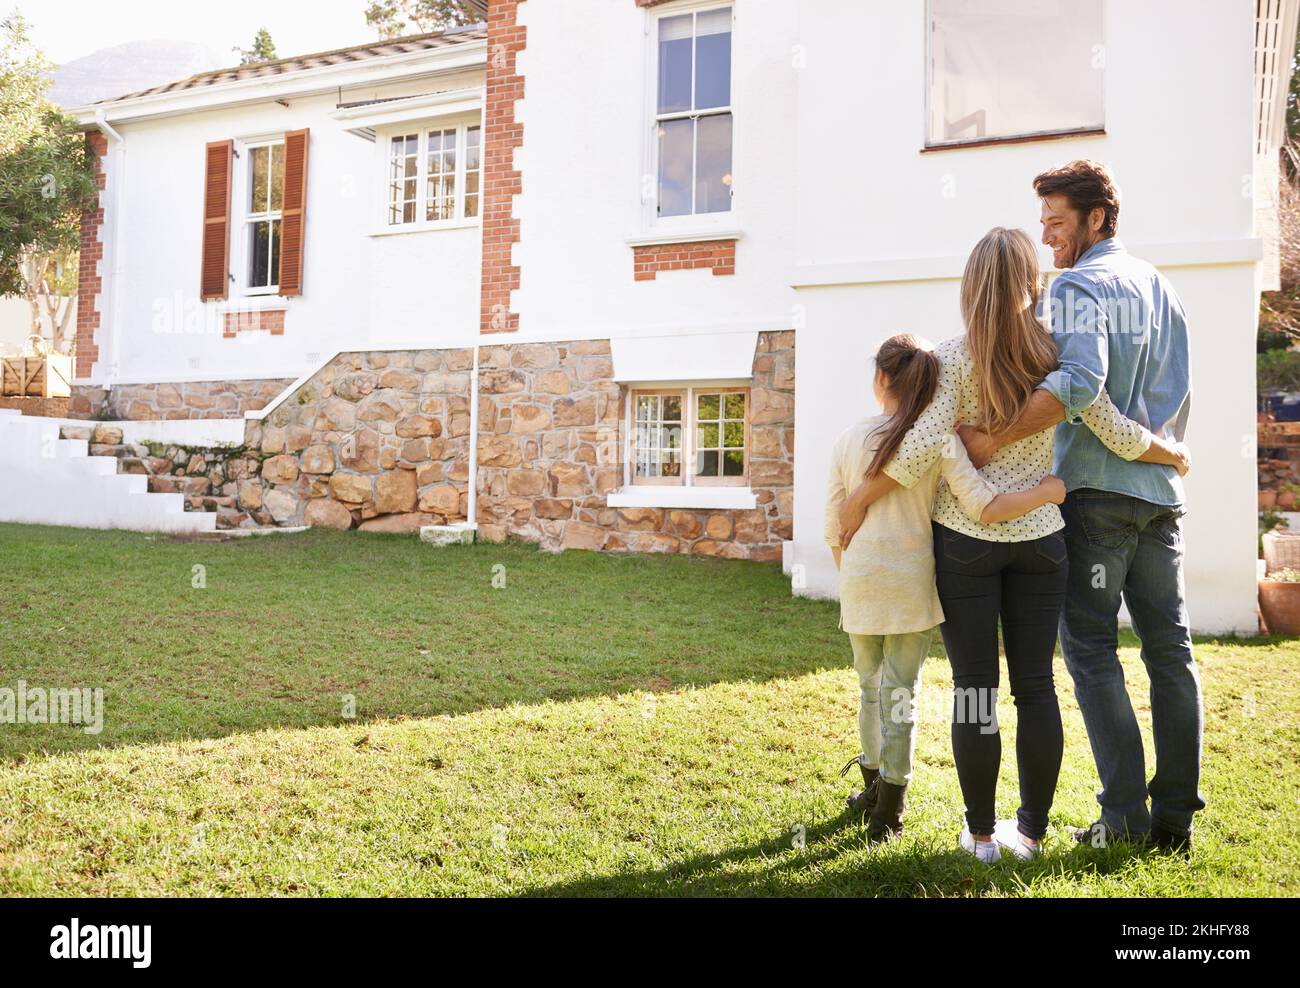 The place we call home. A family standing outdoors admiring their new home. Stock Photo